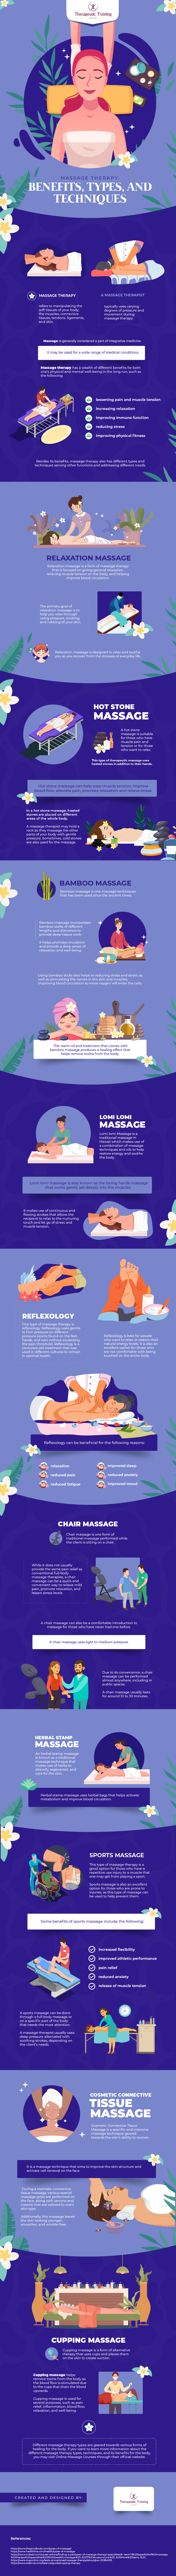 massage_therapy_infographic_image